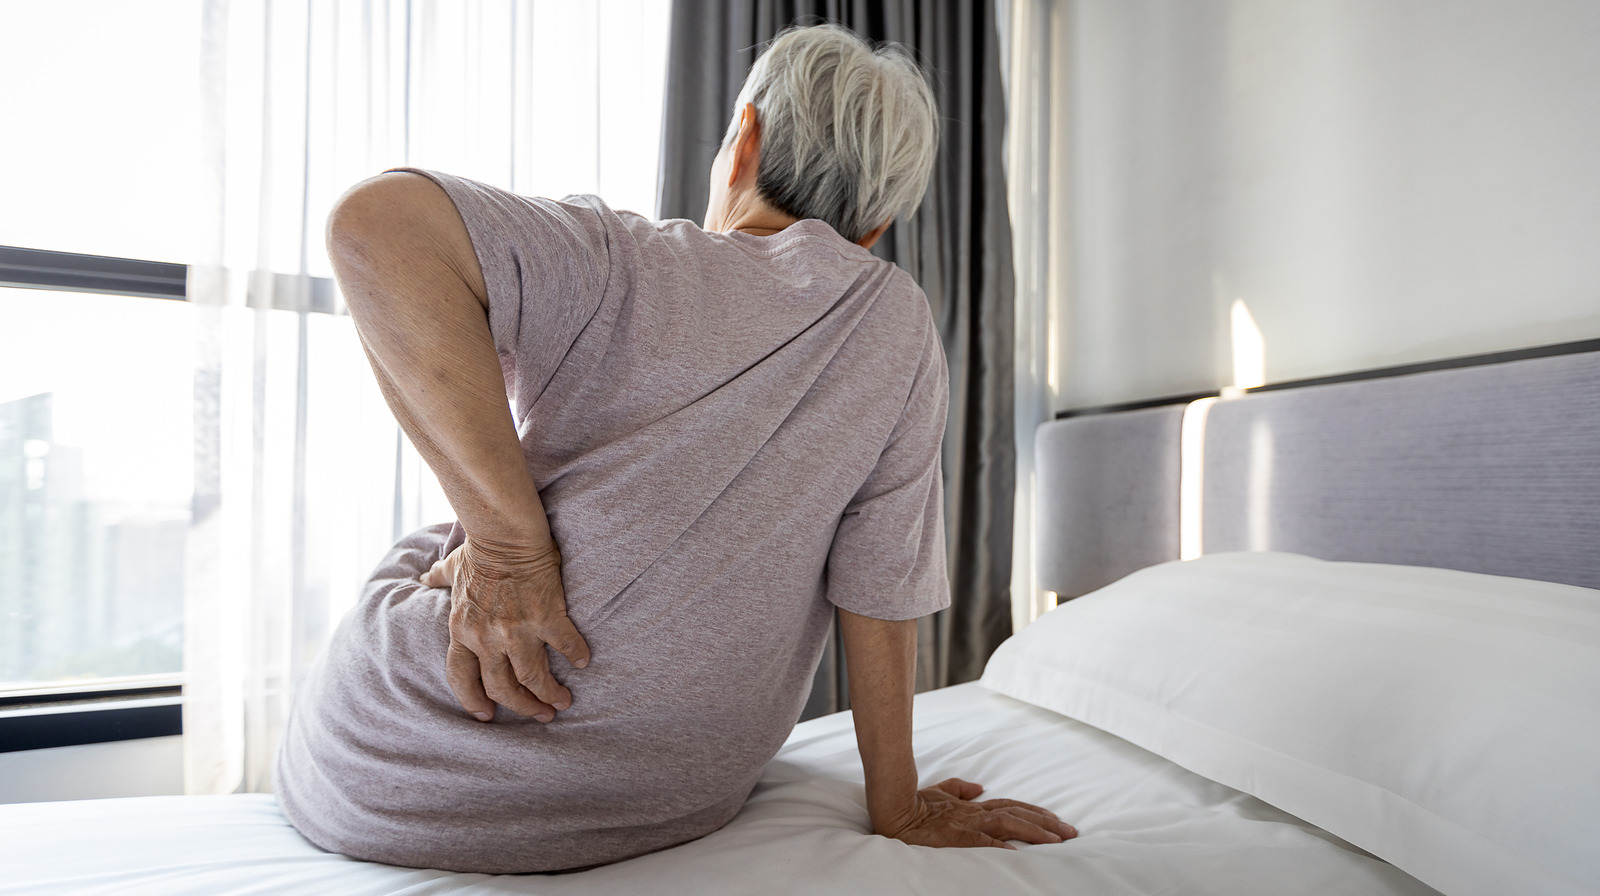 The Real Reason Older People Wake Up Earlier